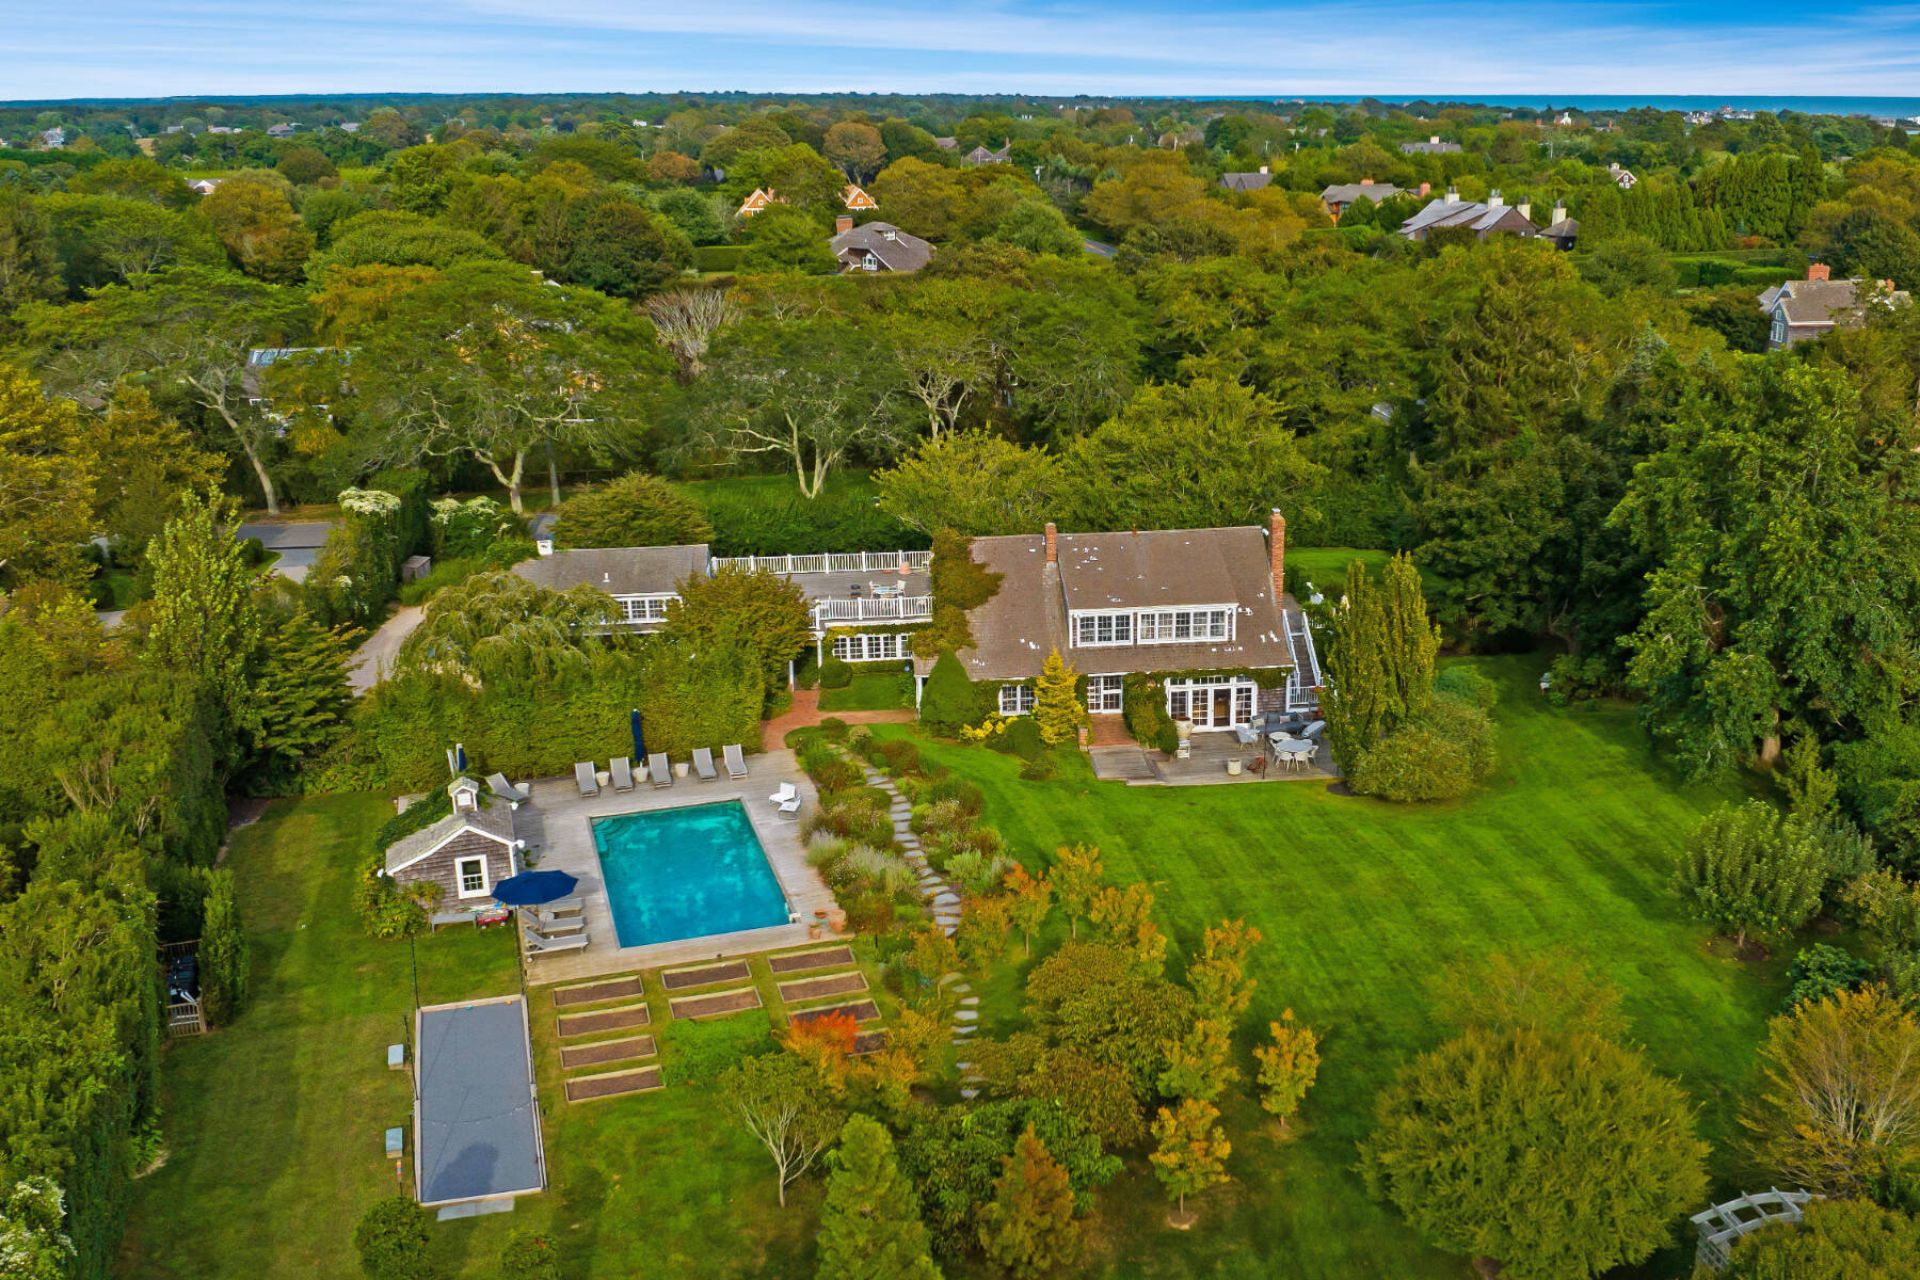 Drew Barrymore’s House In The Hamptons Is Up For Sale